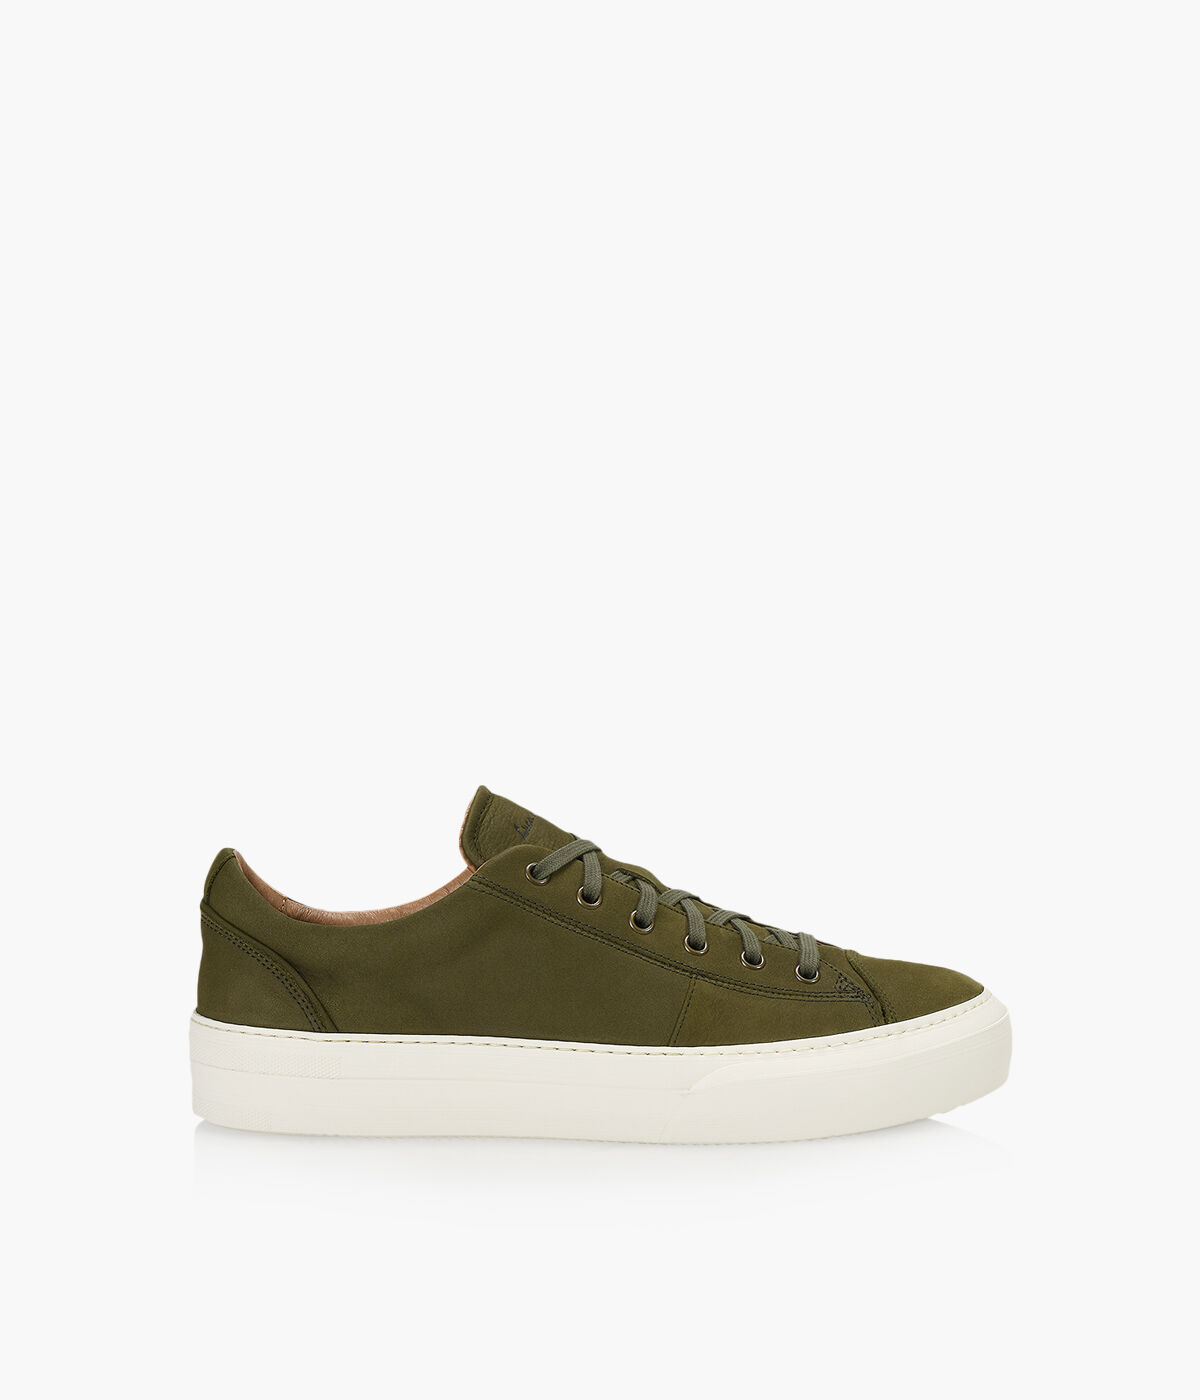 Buy Roadster Men Olive Green Sneakers - Casual Shoes for Men 5962196 |  Myntra